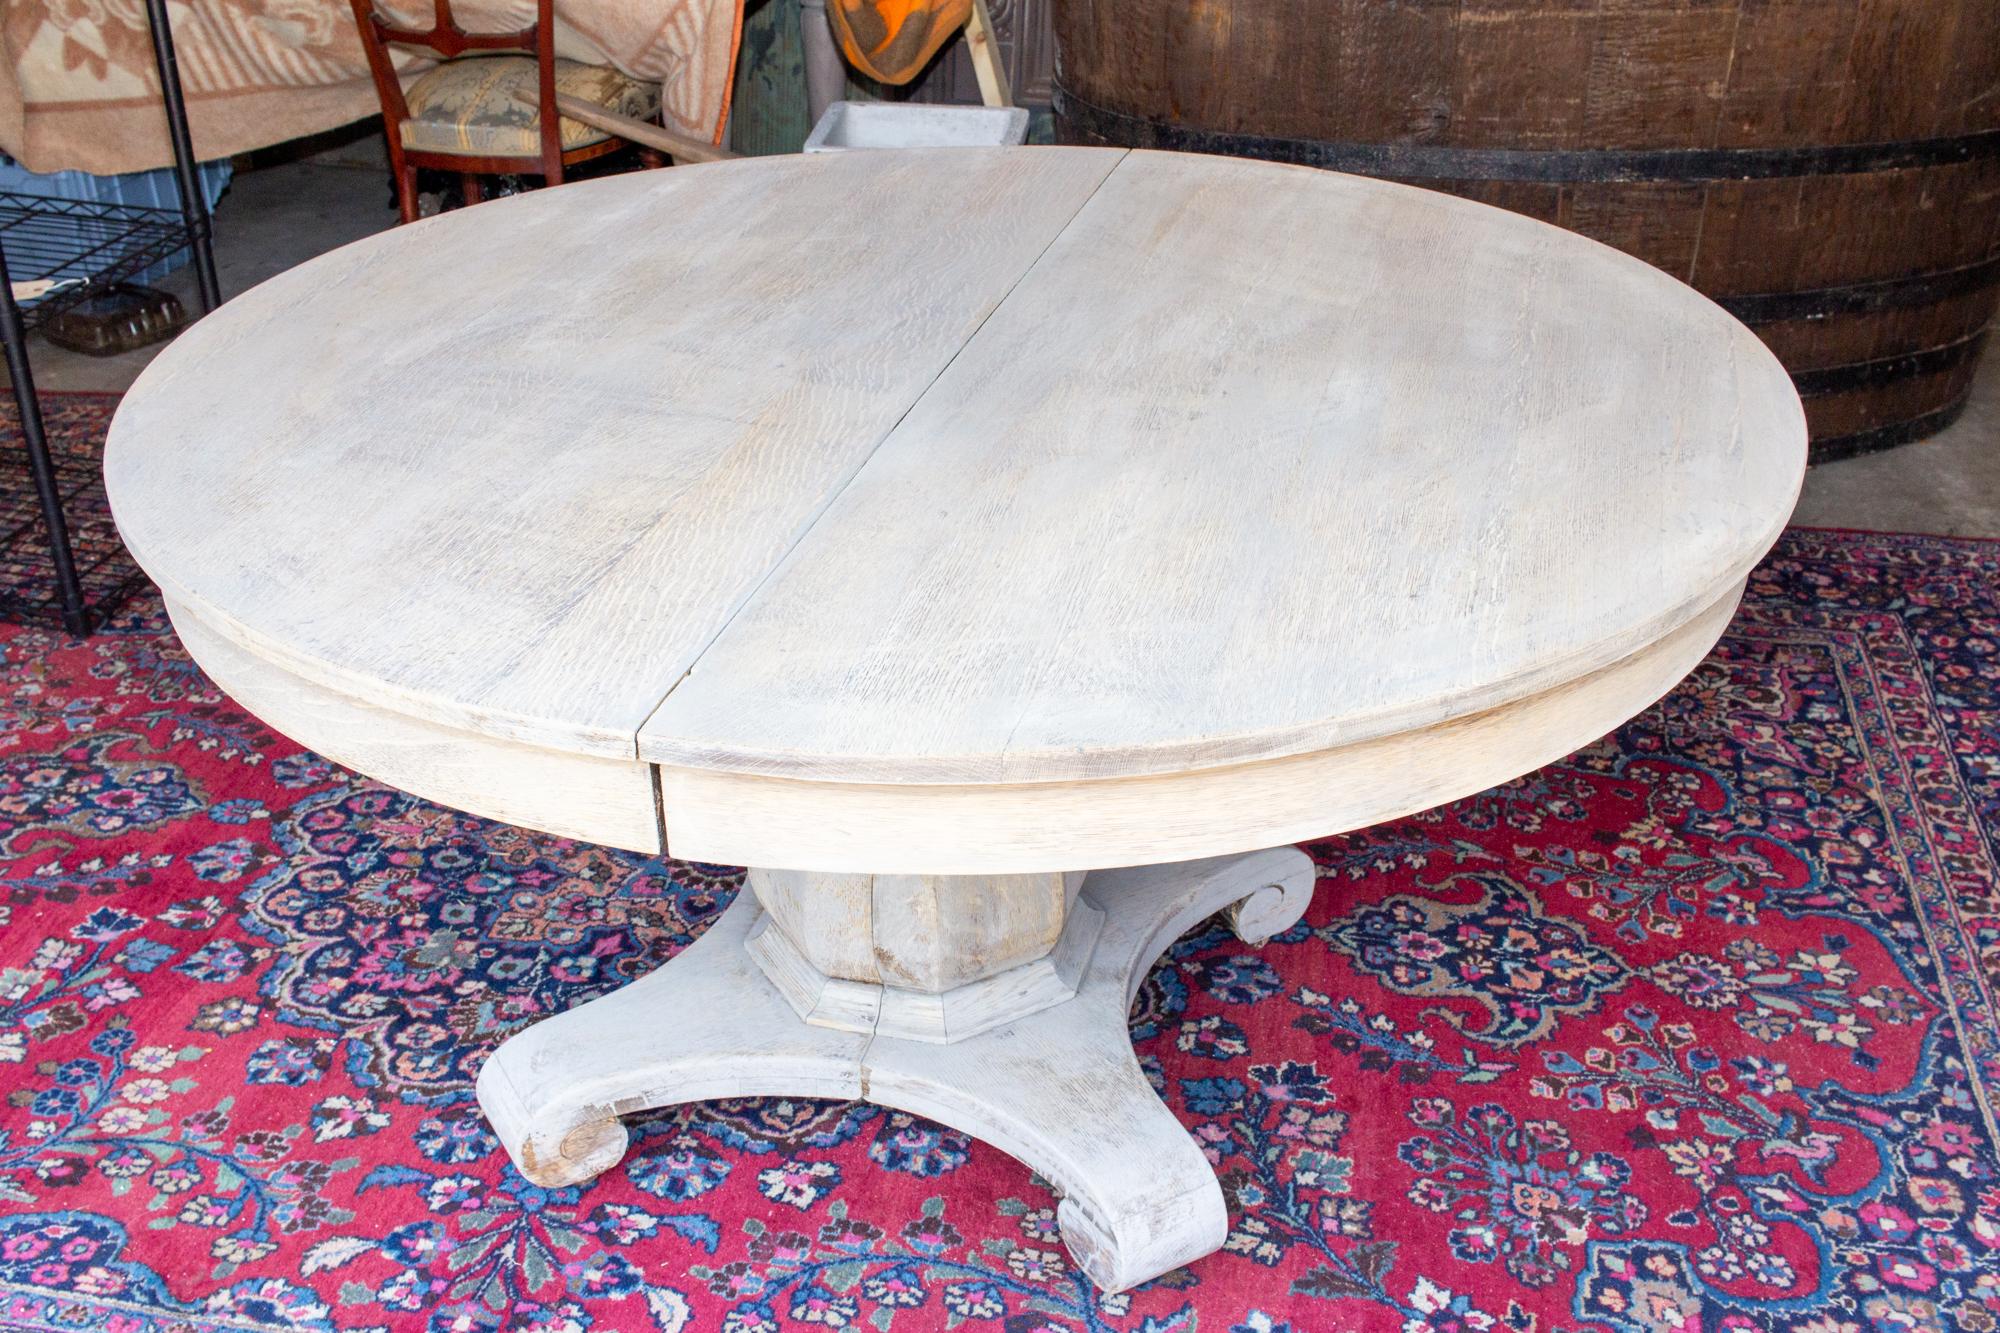 19th Century Antique Round Oak Pedestal Table in Light Greige Finish with Extension Leaves